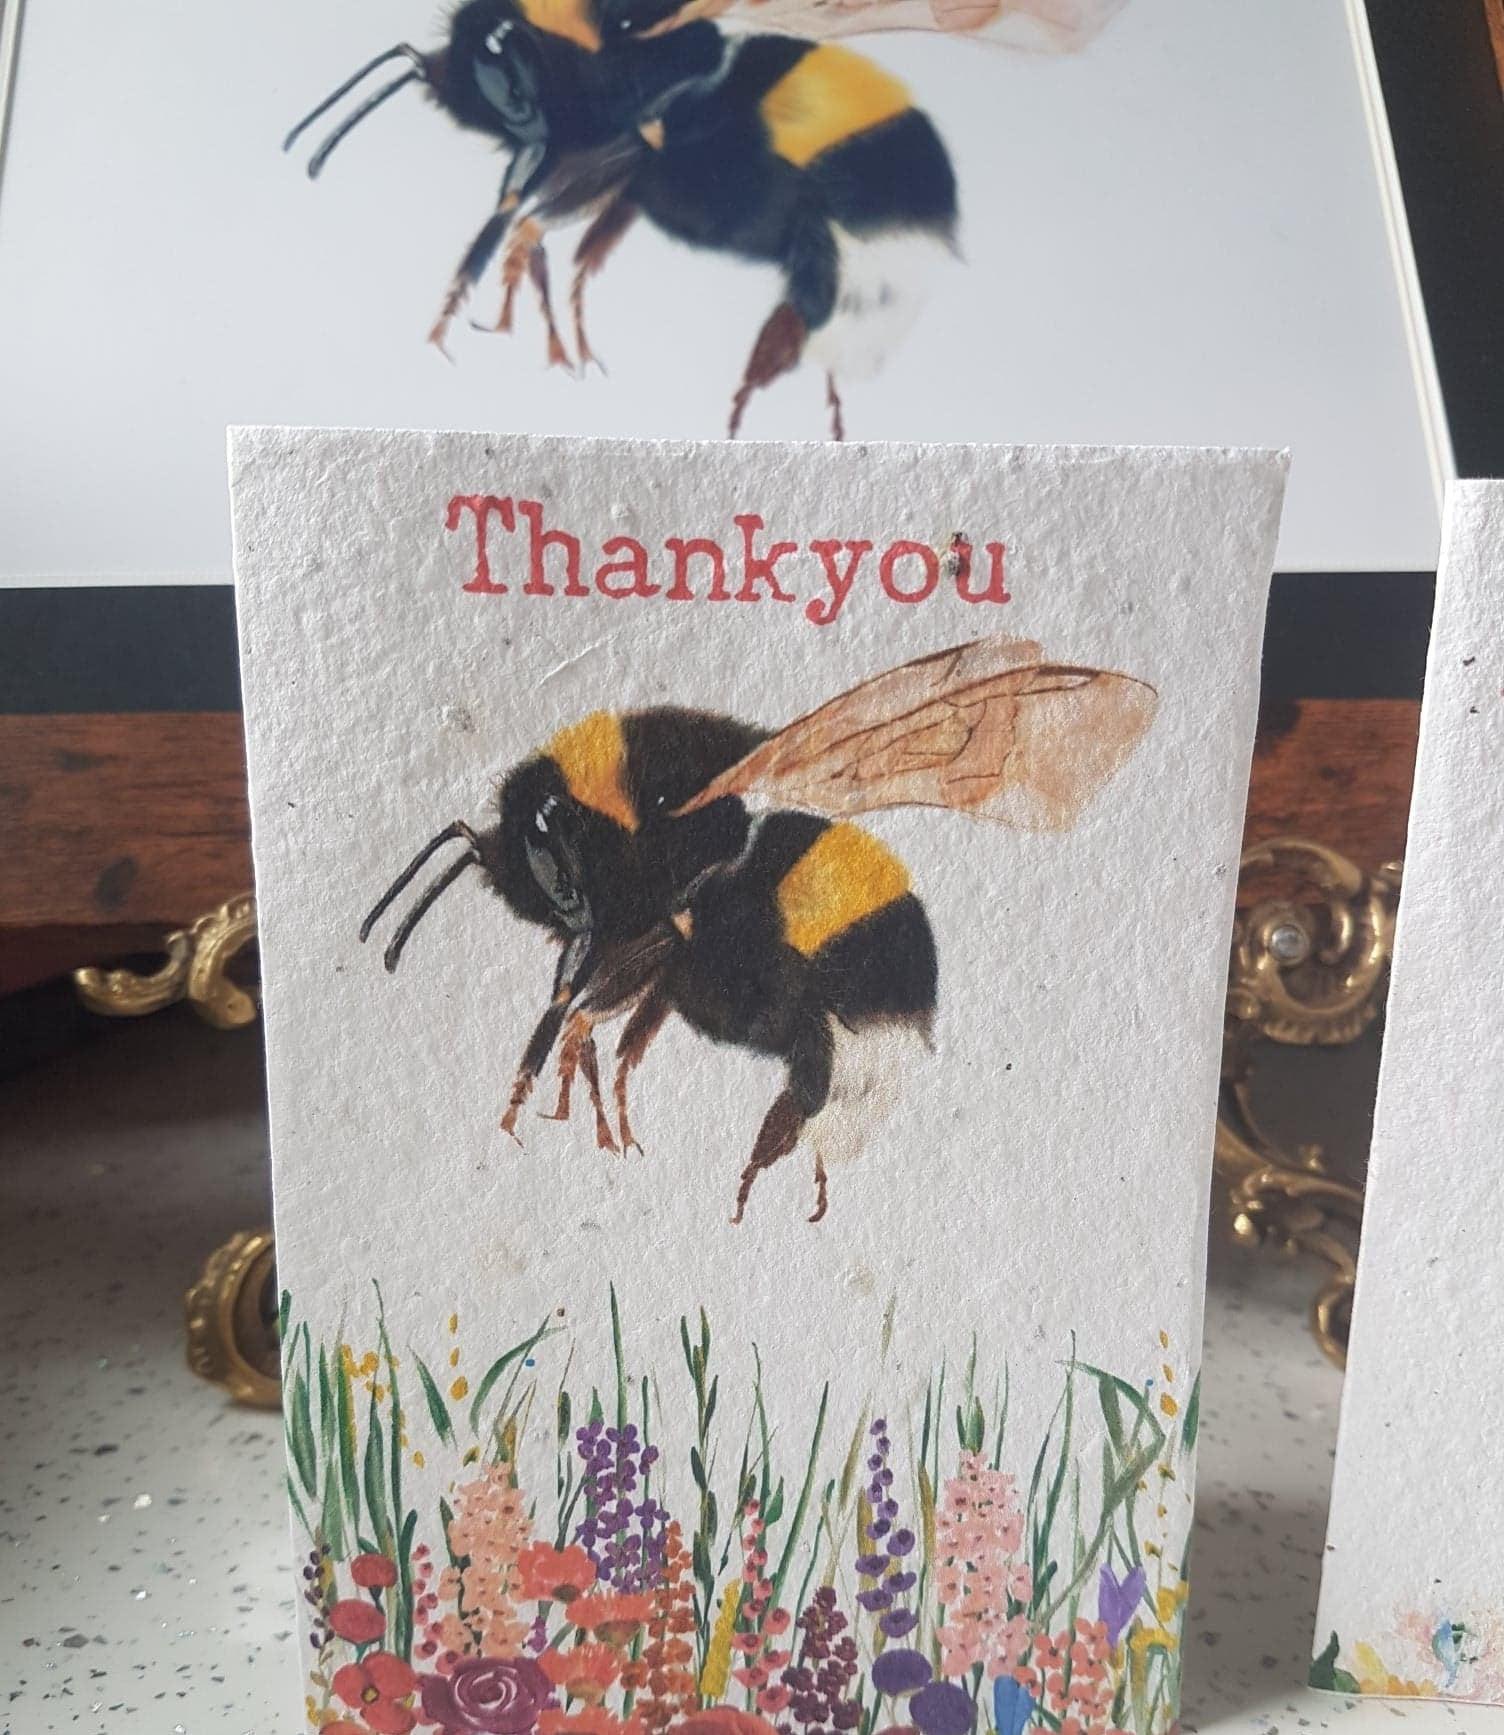 ECO and VEGAN Friendly PLANTABLE Thankyou Seed Cards -Bee Cards - Wildflower cards - Seed paper cards -Save the bees - Plantable cards- Lamb